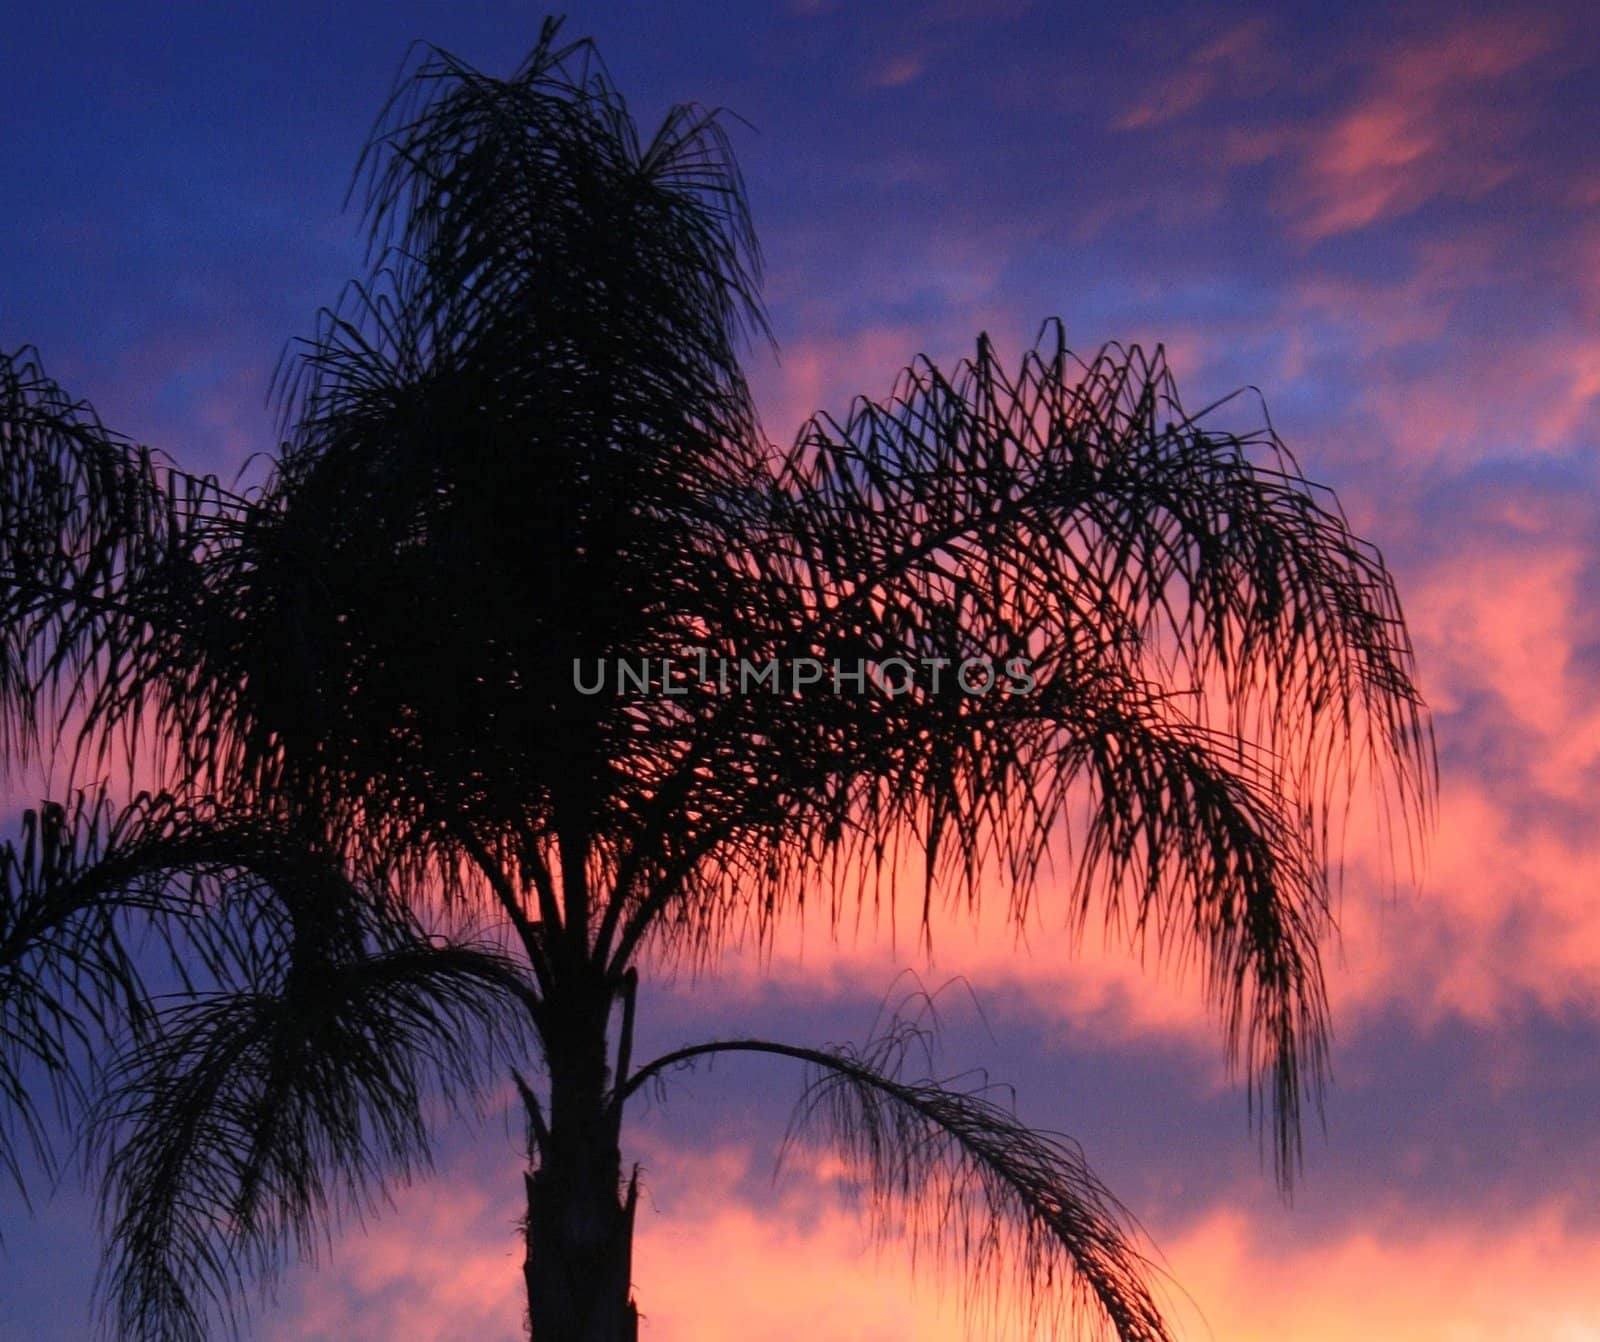 A palm tree in sunset in Florida.